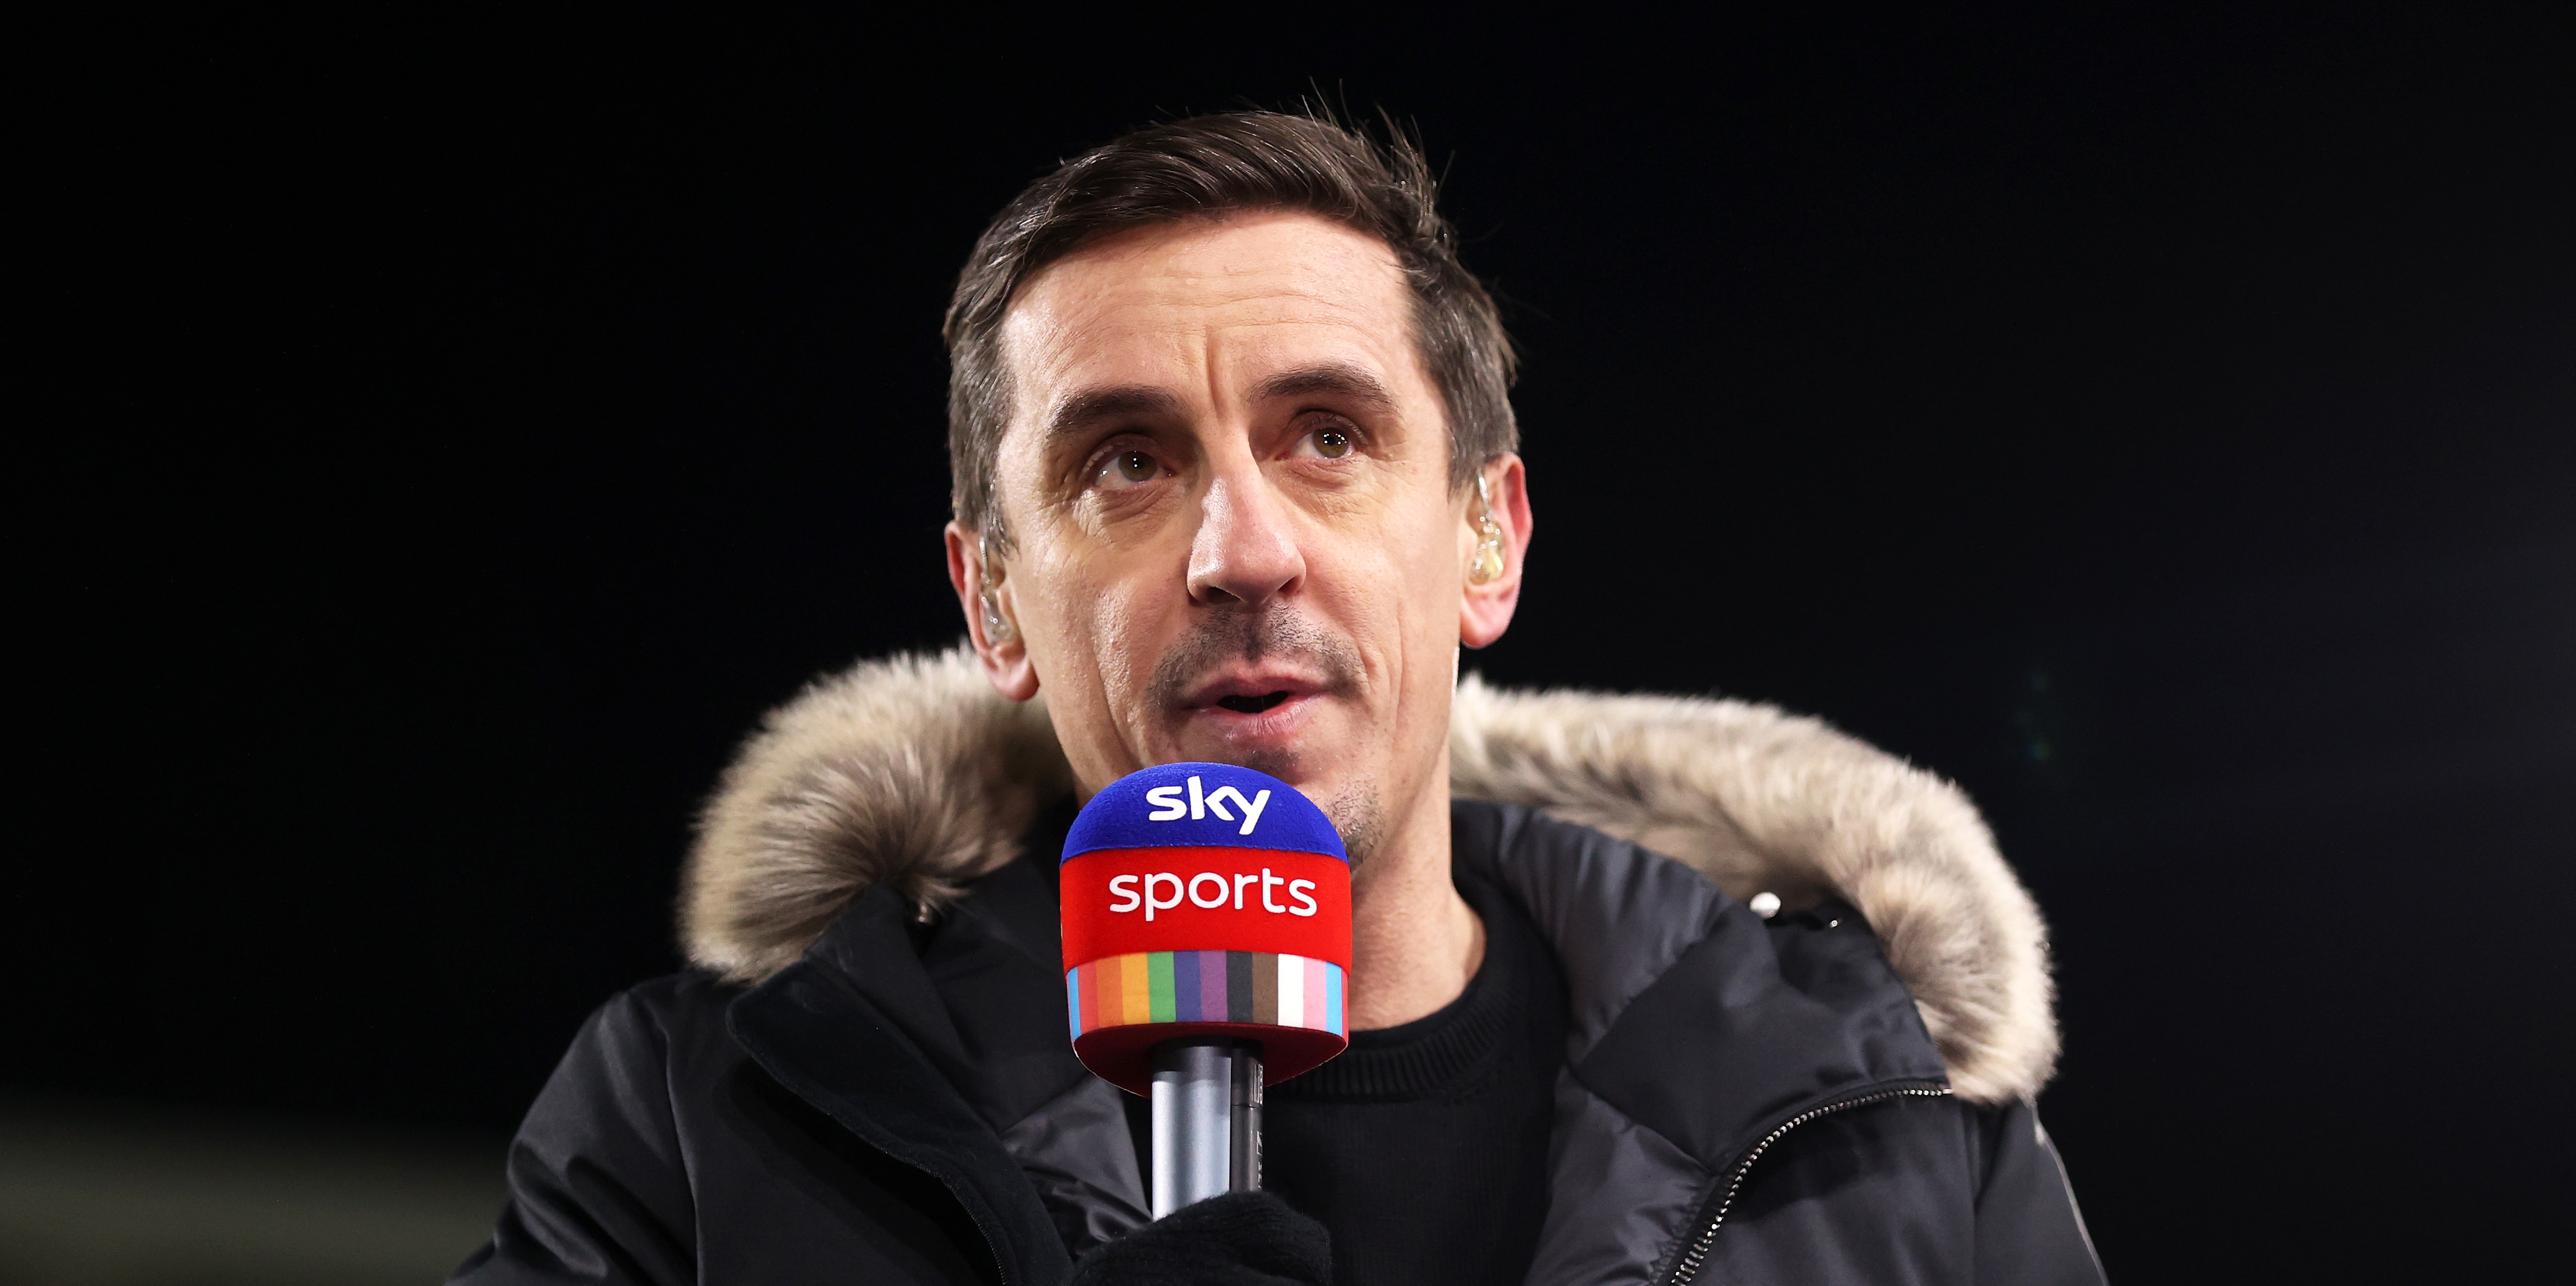 Some Liverpool fans react to ‘biased’ commentary of Liverpool-Chelsea clash after Neville’s utterly bizarre outburst